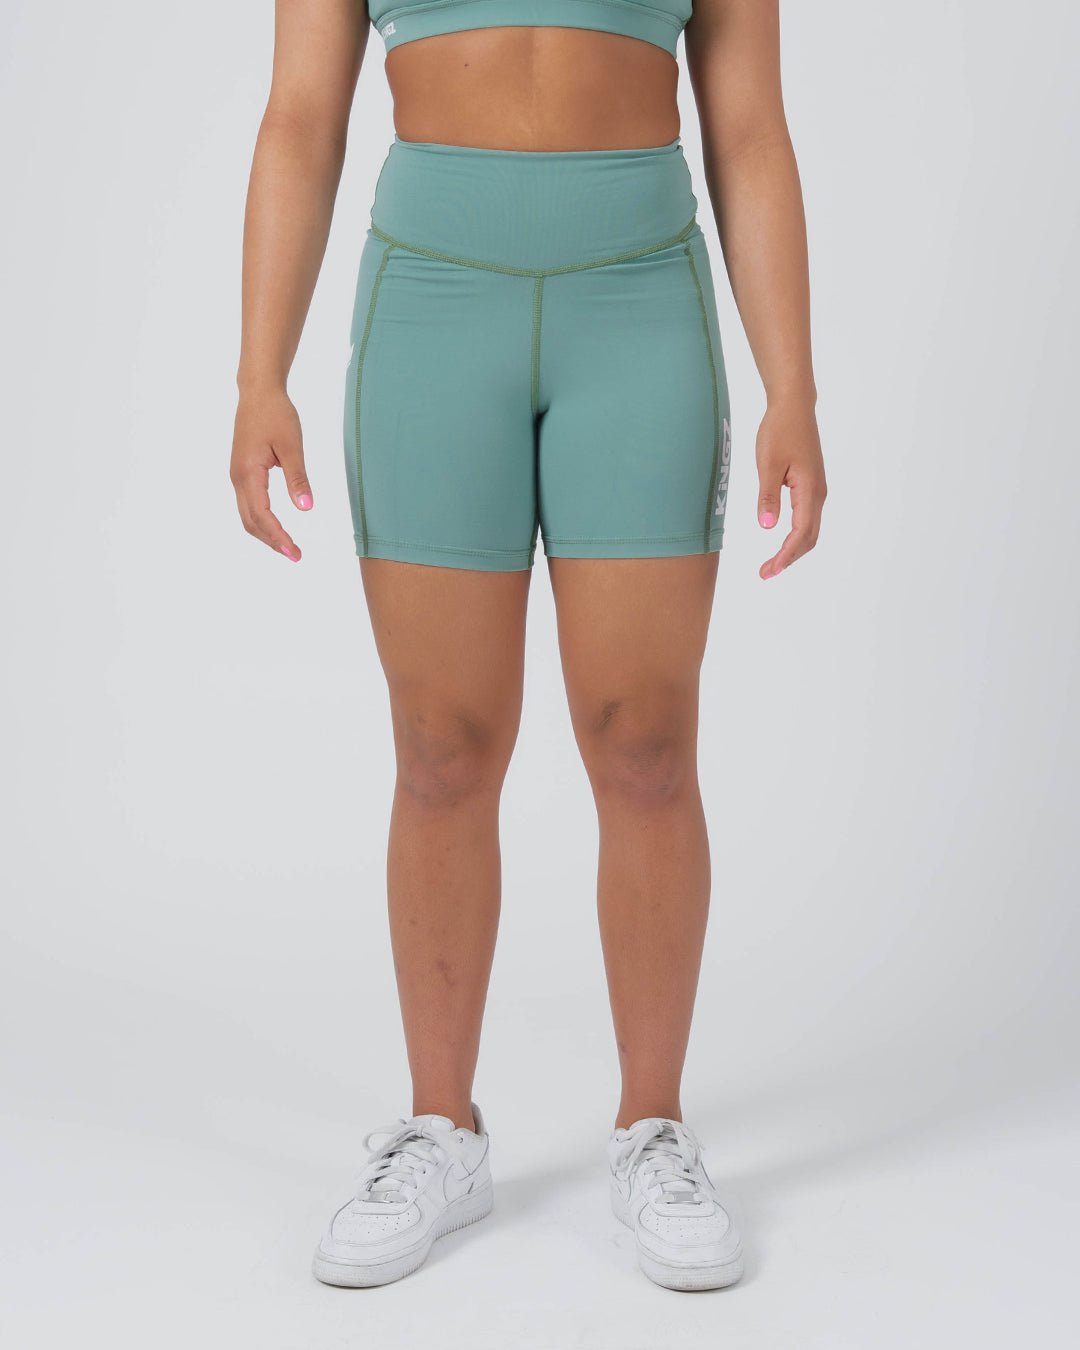 korea ladies short pants for Fitness, Functionality and Style